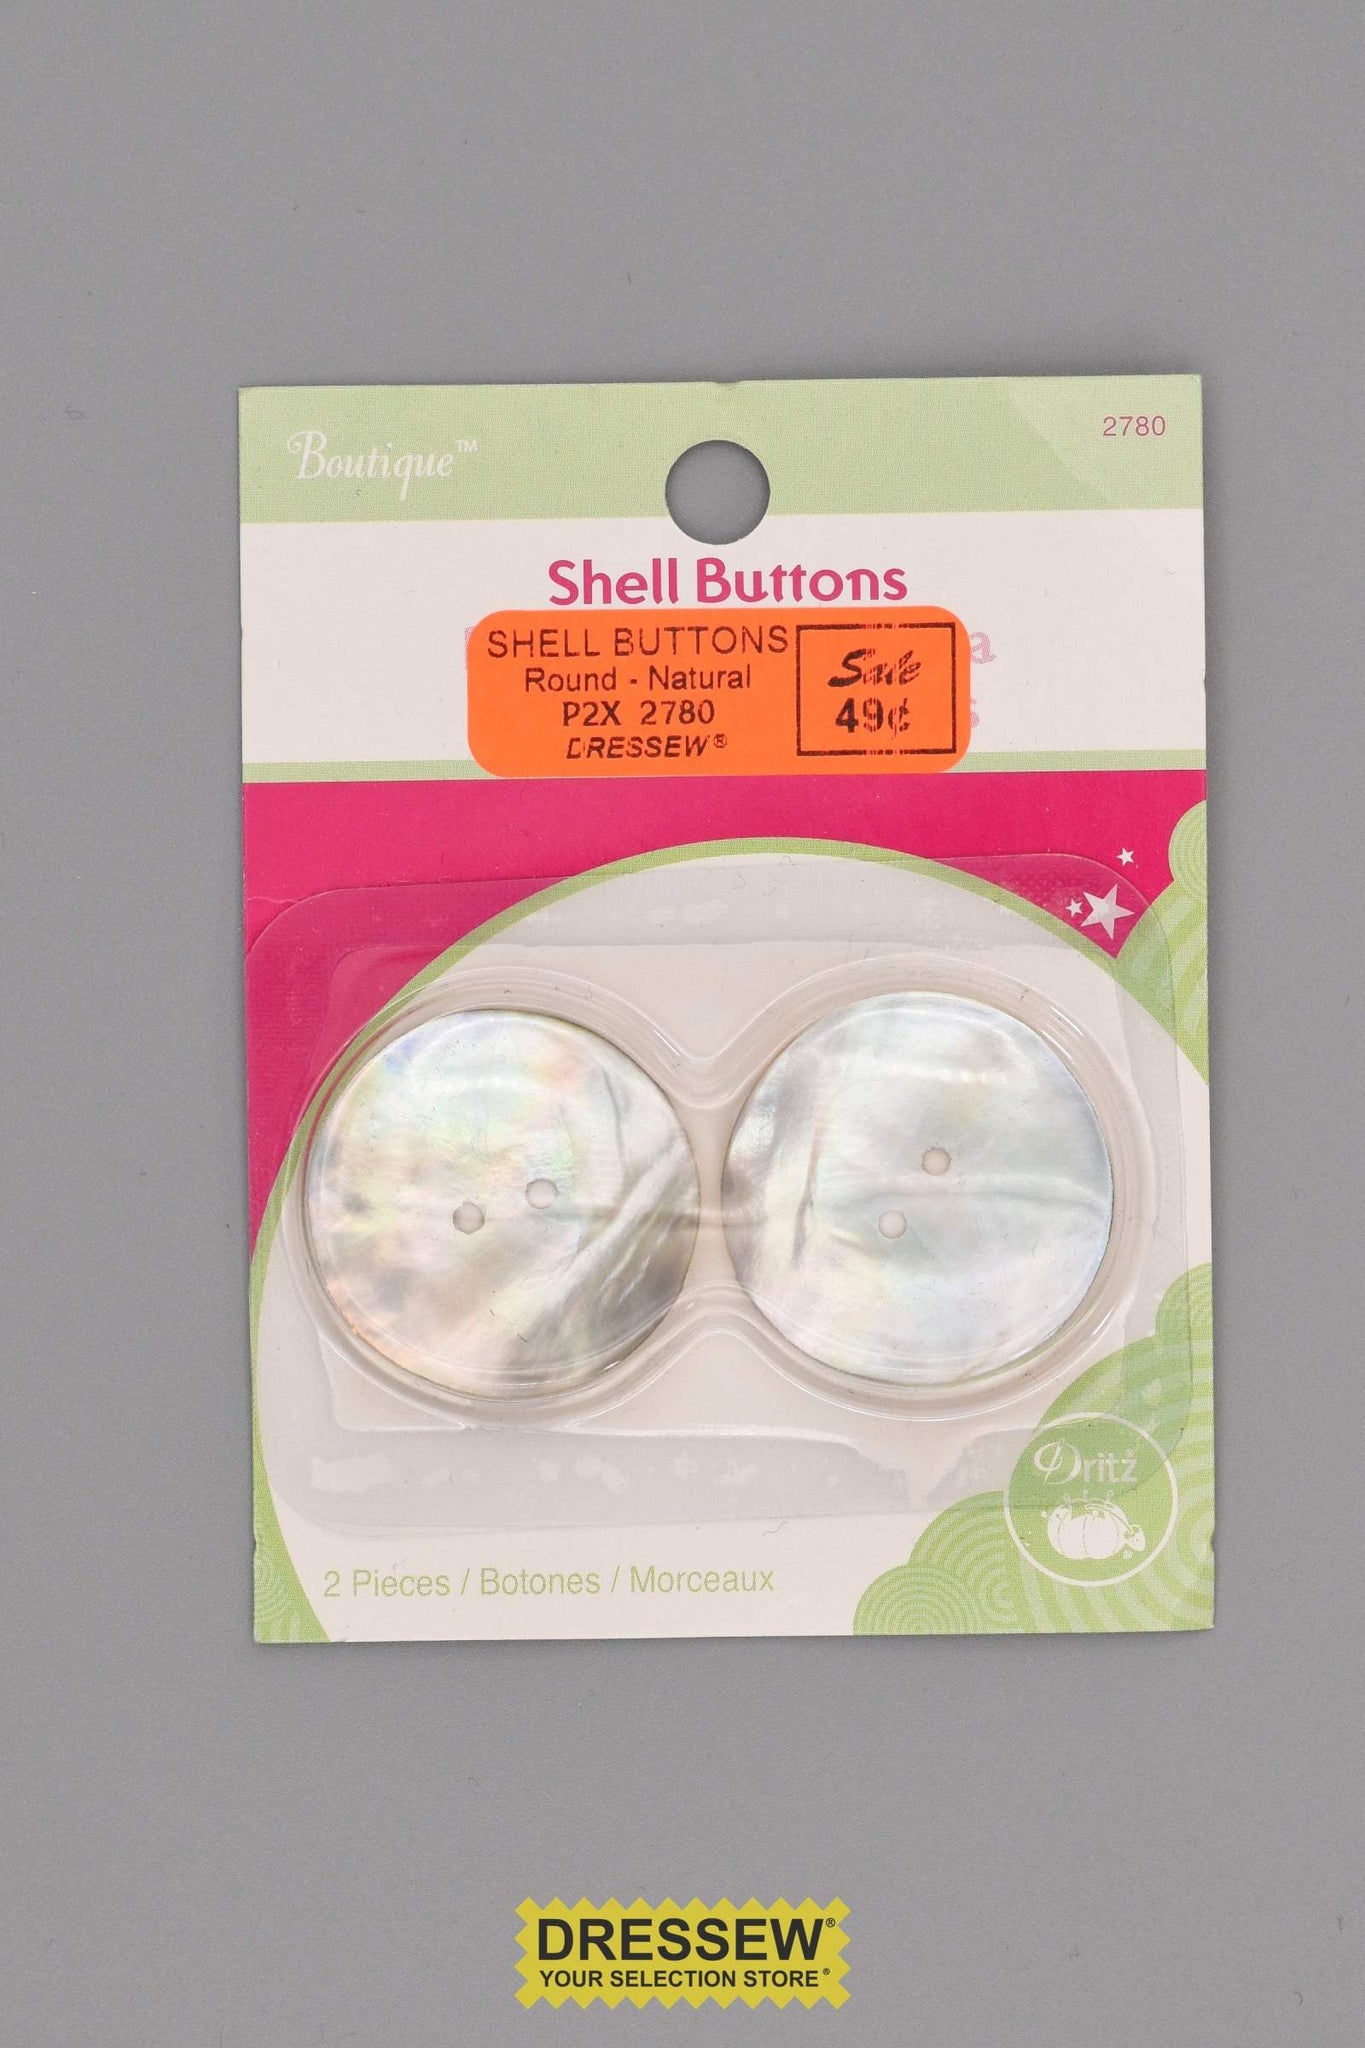 Shell Buttons Round Natural